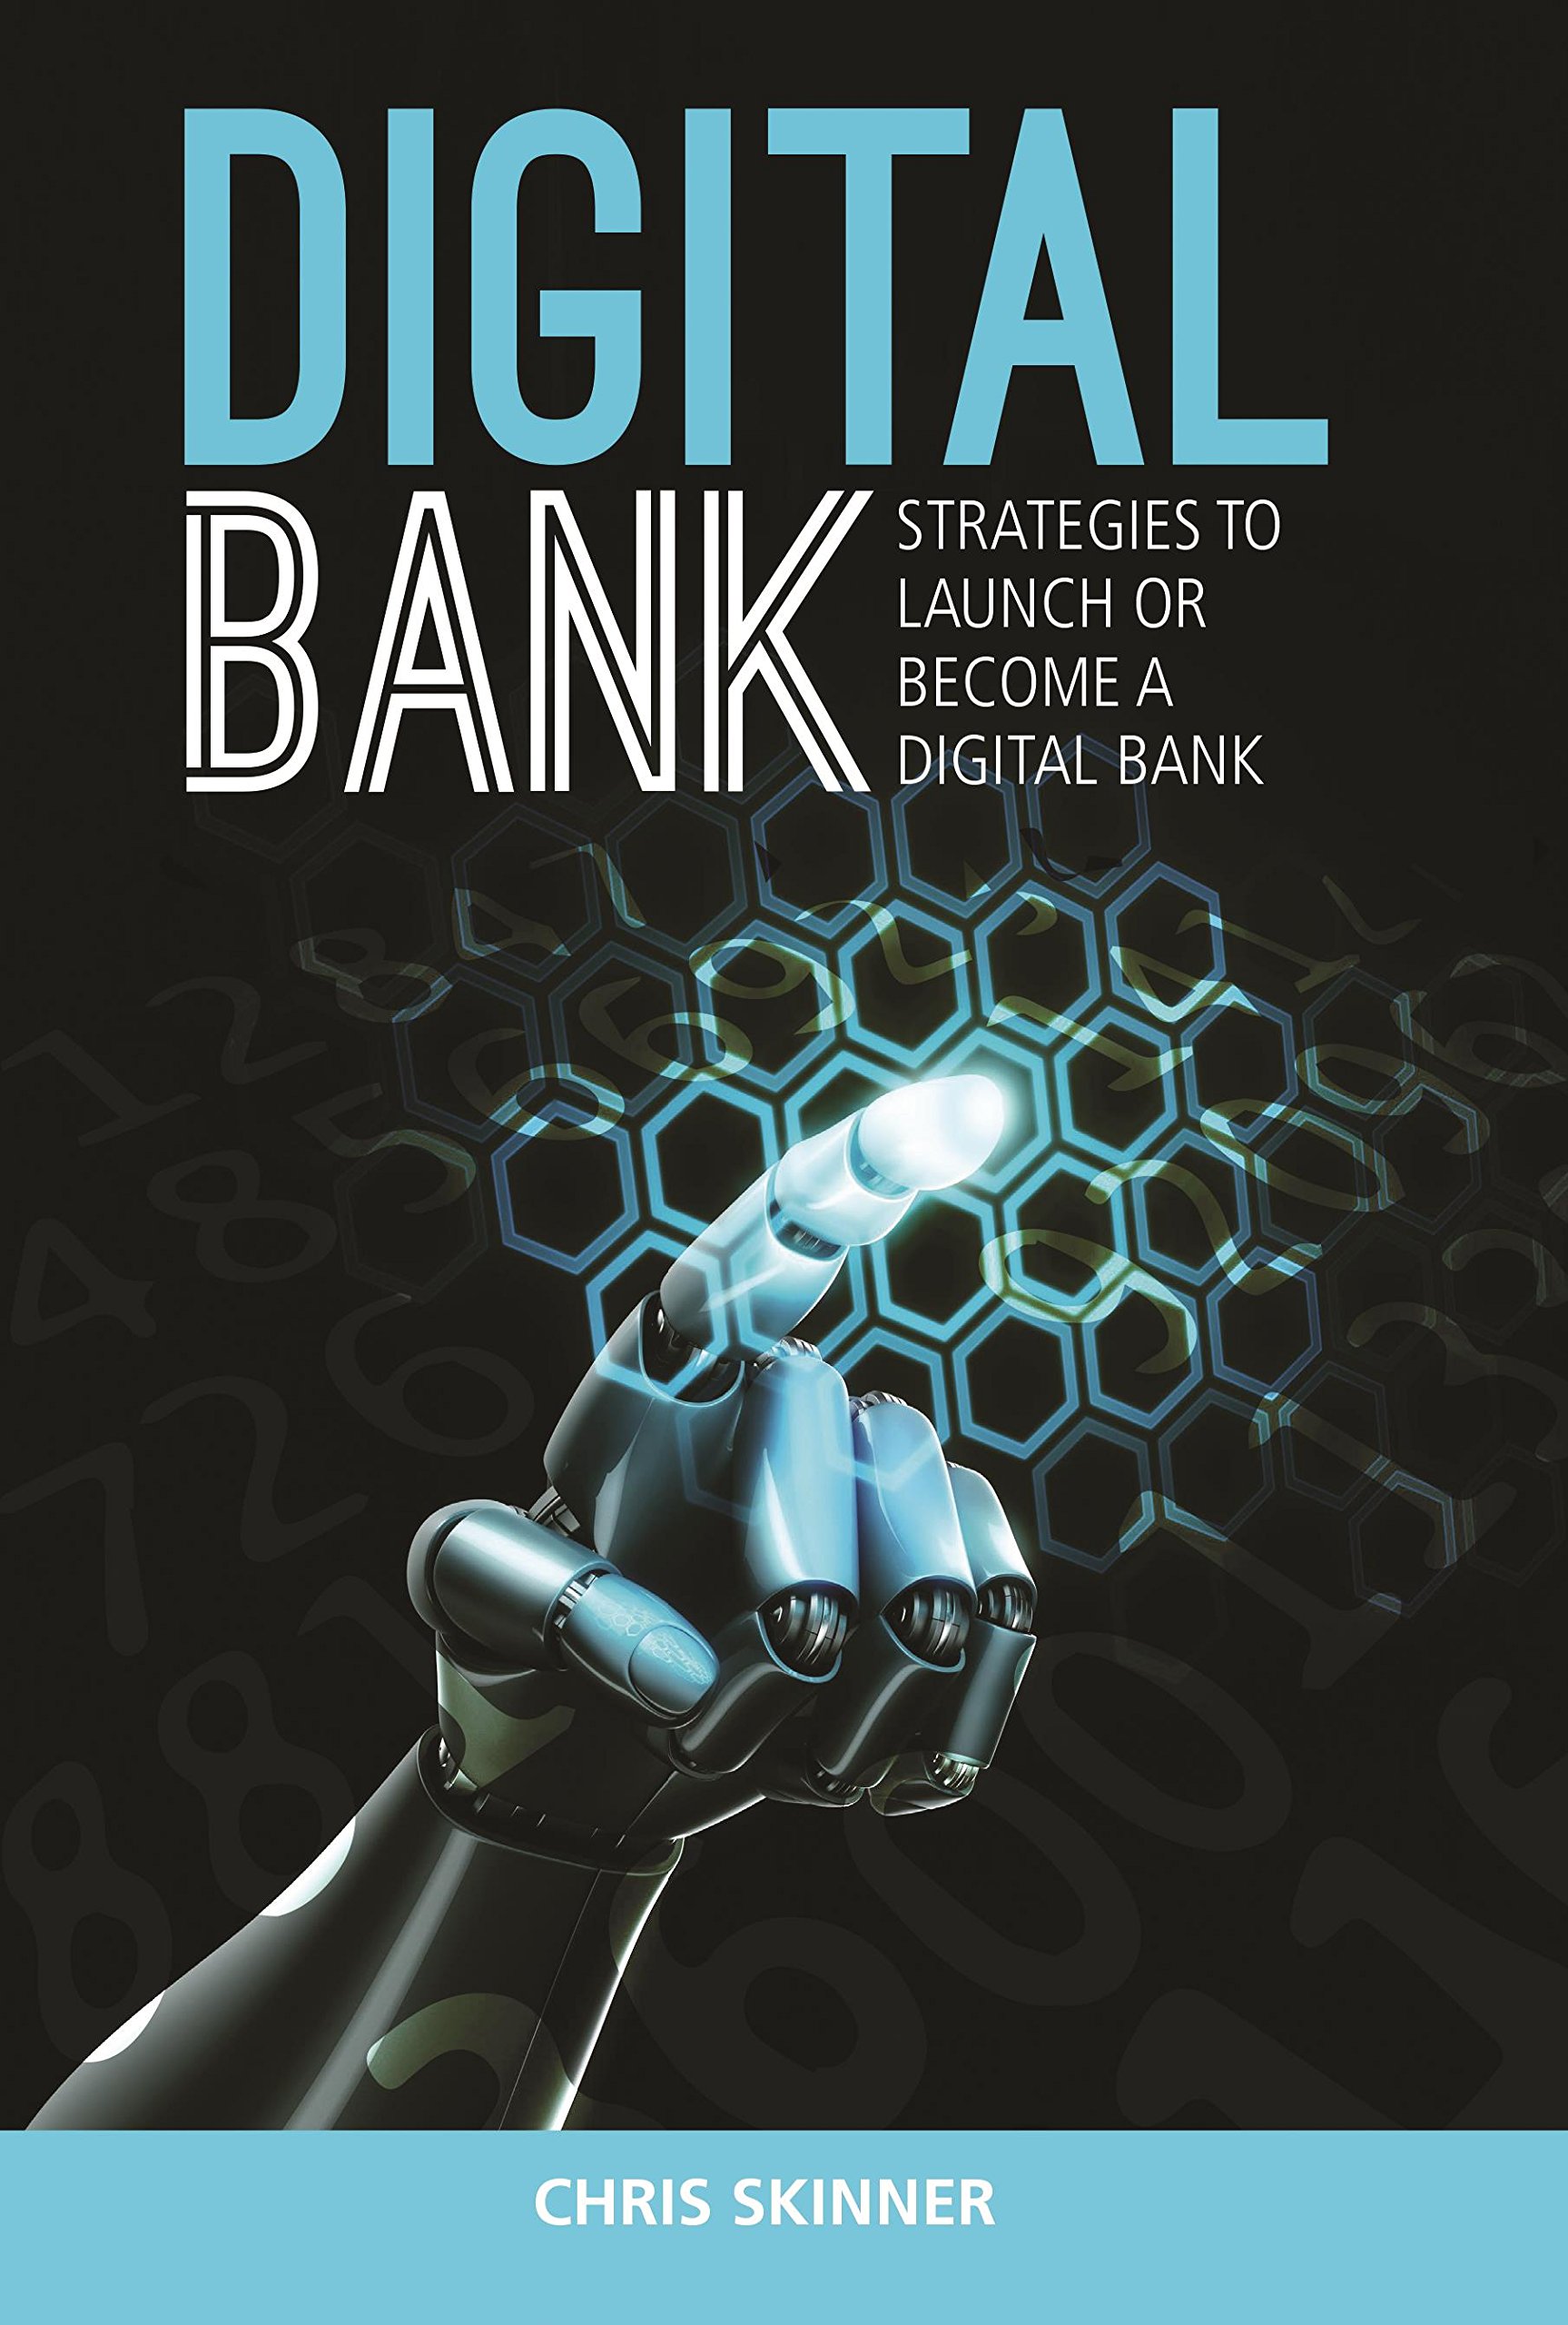 Digital bank strategies to launch or become a digital bank - ebooksz